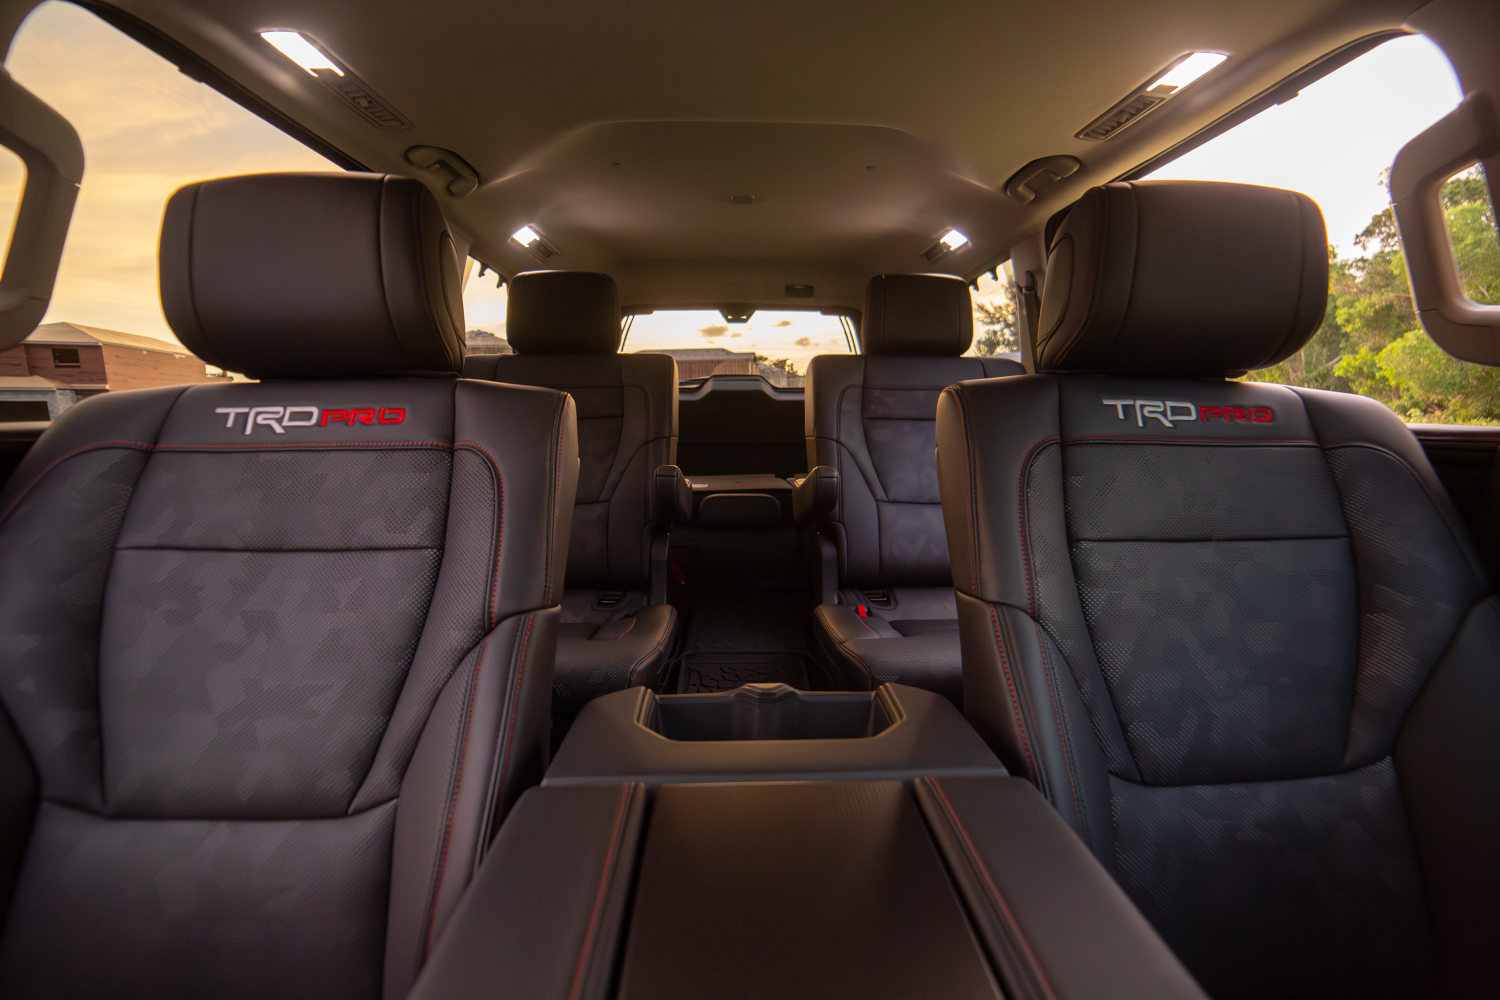 The best family SUV might have three rows like this Toyota Sequoia